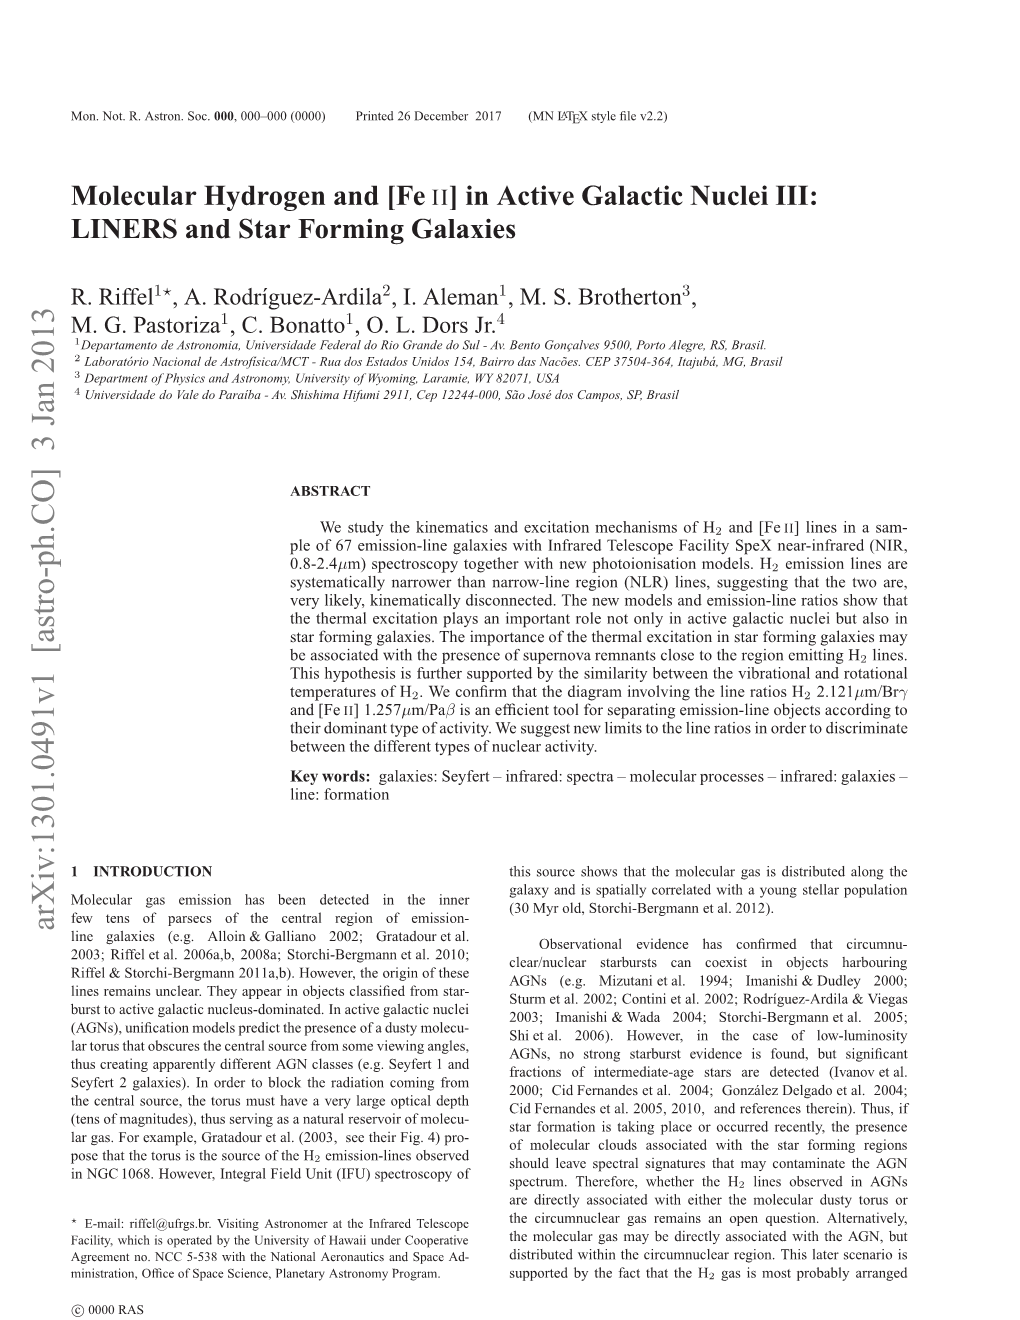 Molecular Hydrogen and [Fe II] in Active Galactic Nuclei III: LINERS